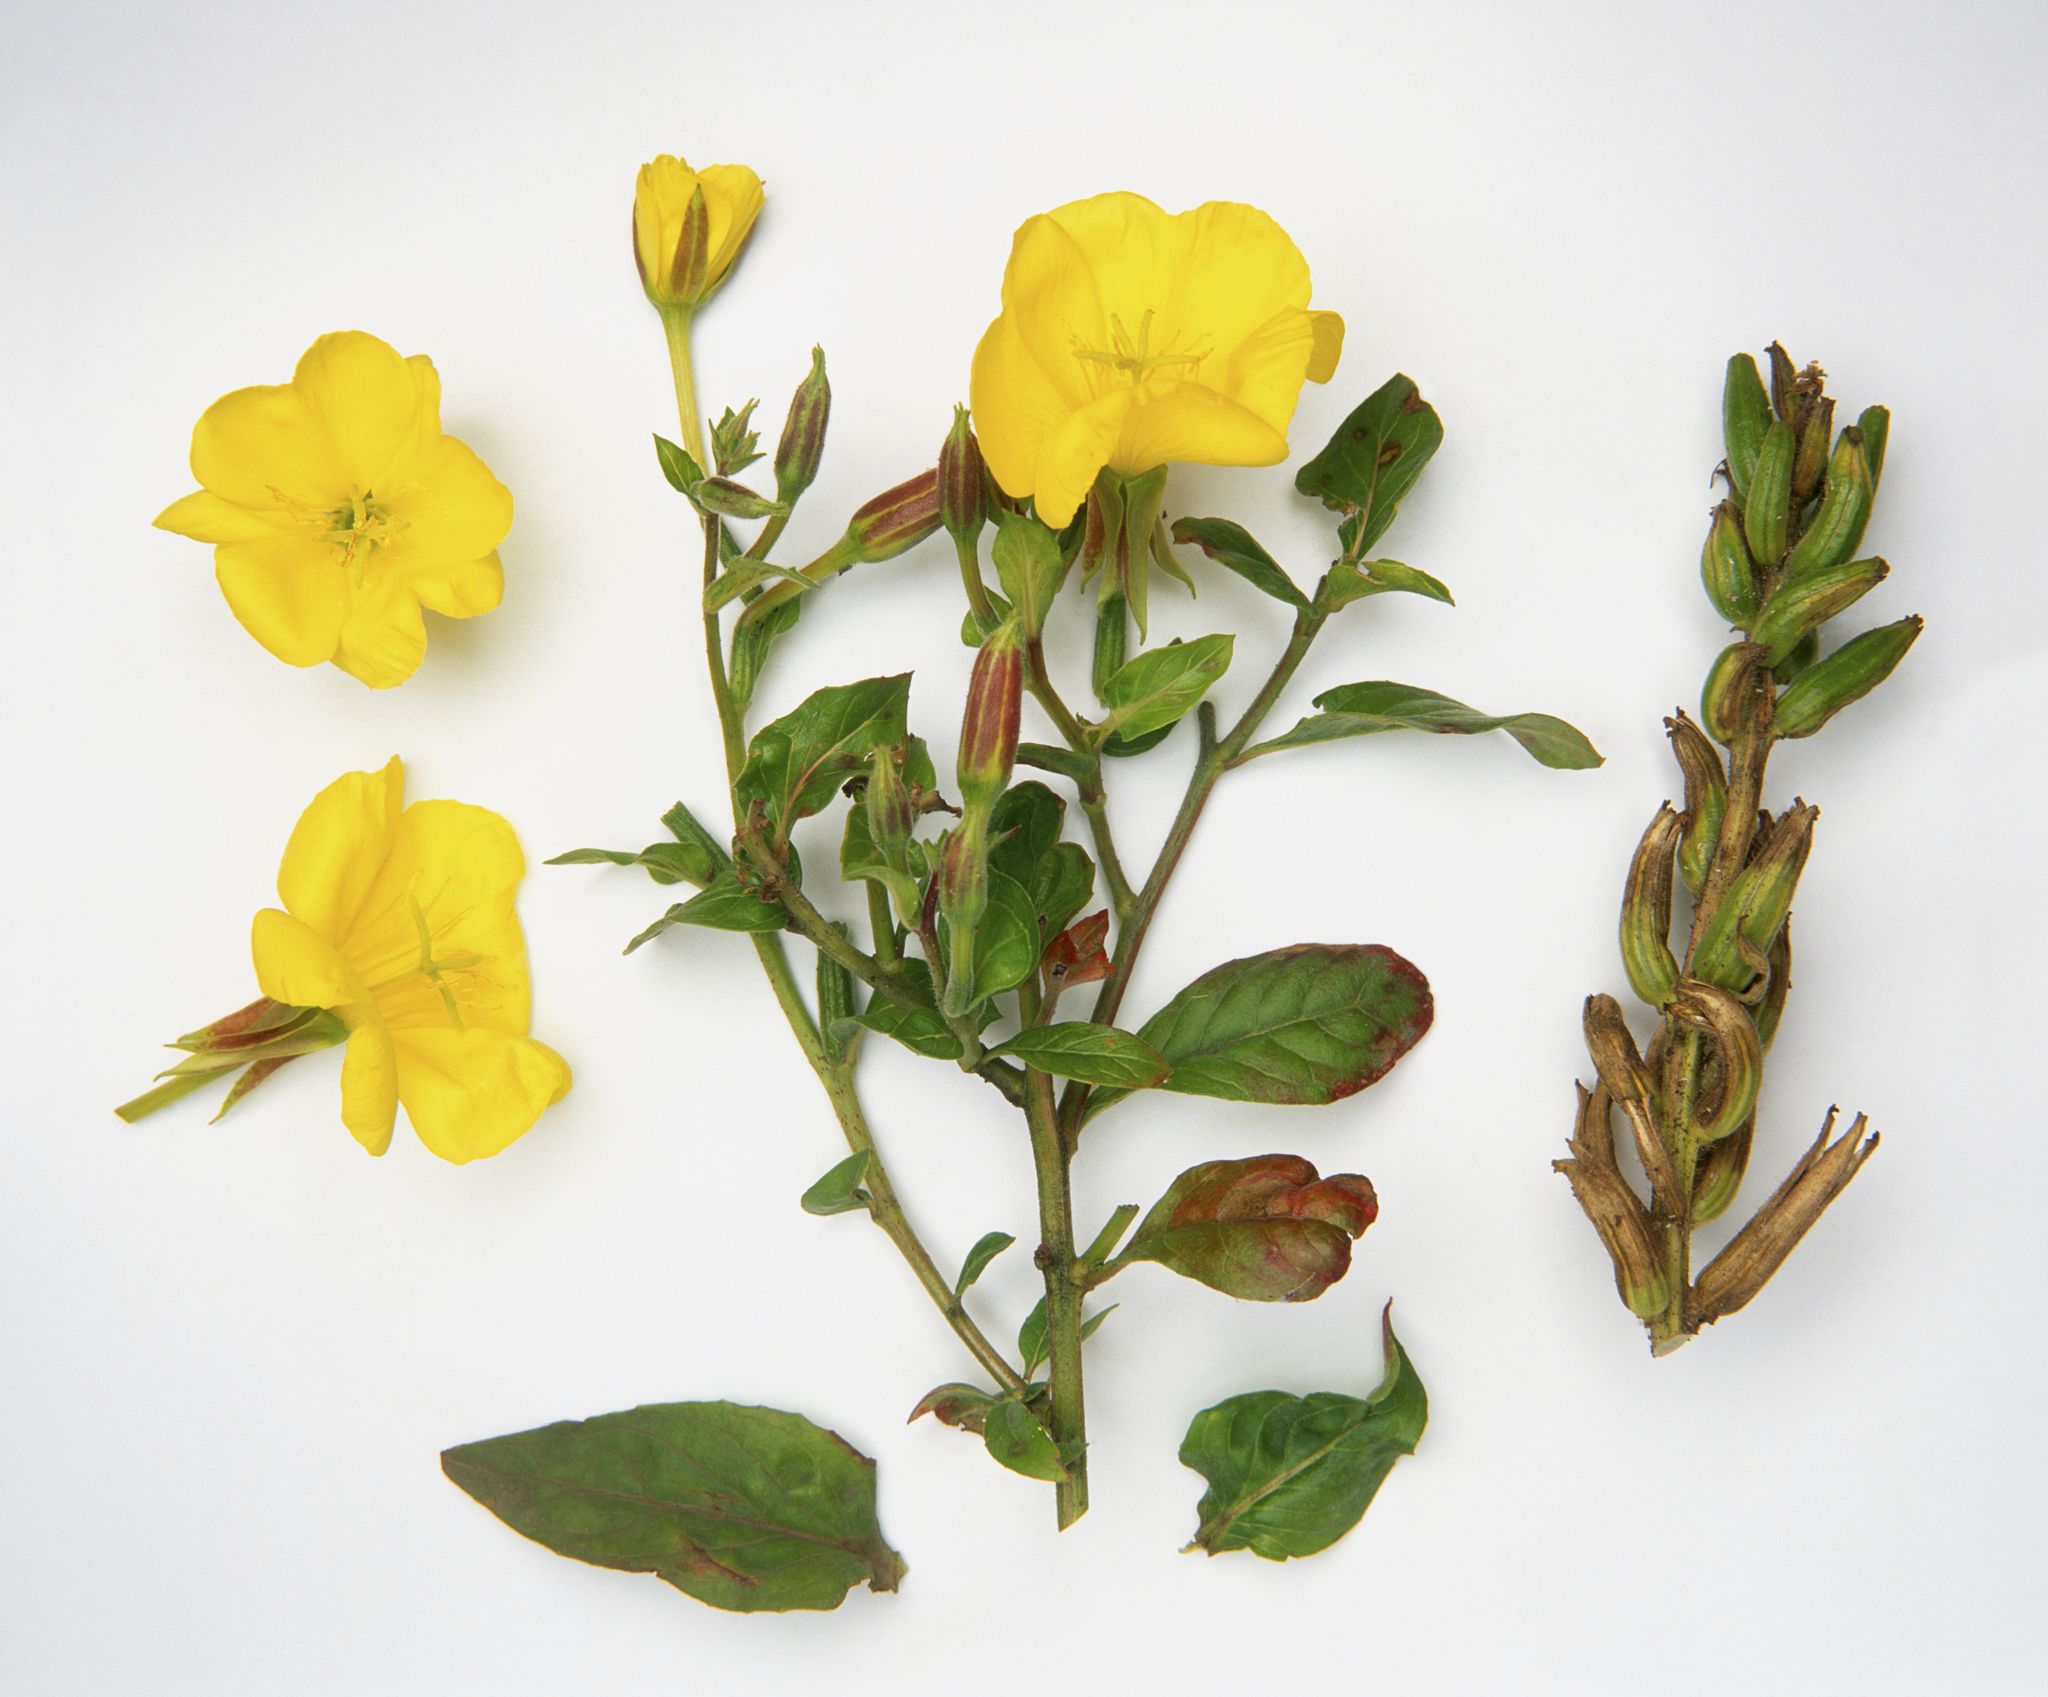 Yellow, flowering stems, stem with seed pods, flower heads and leaves from Oenothera biennis (Evening primrose)